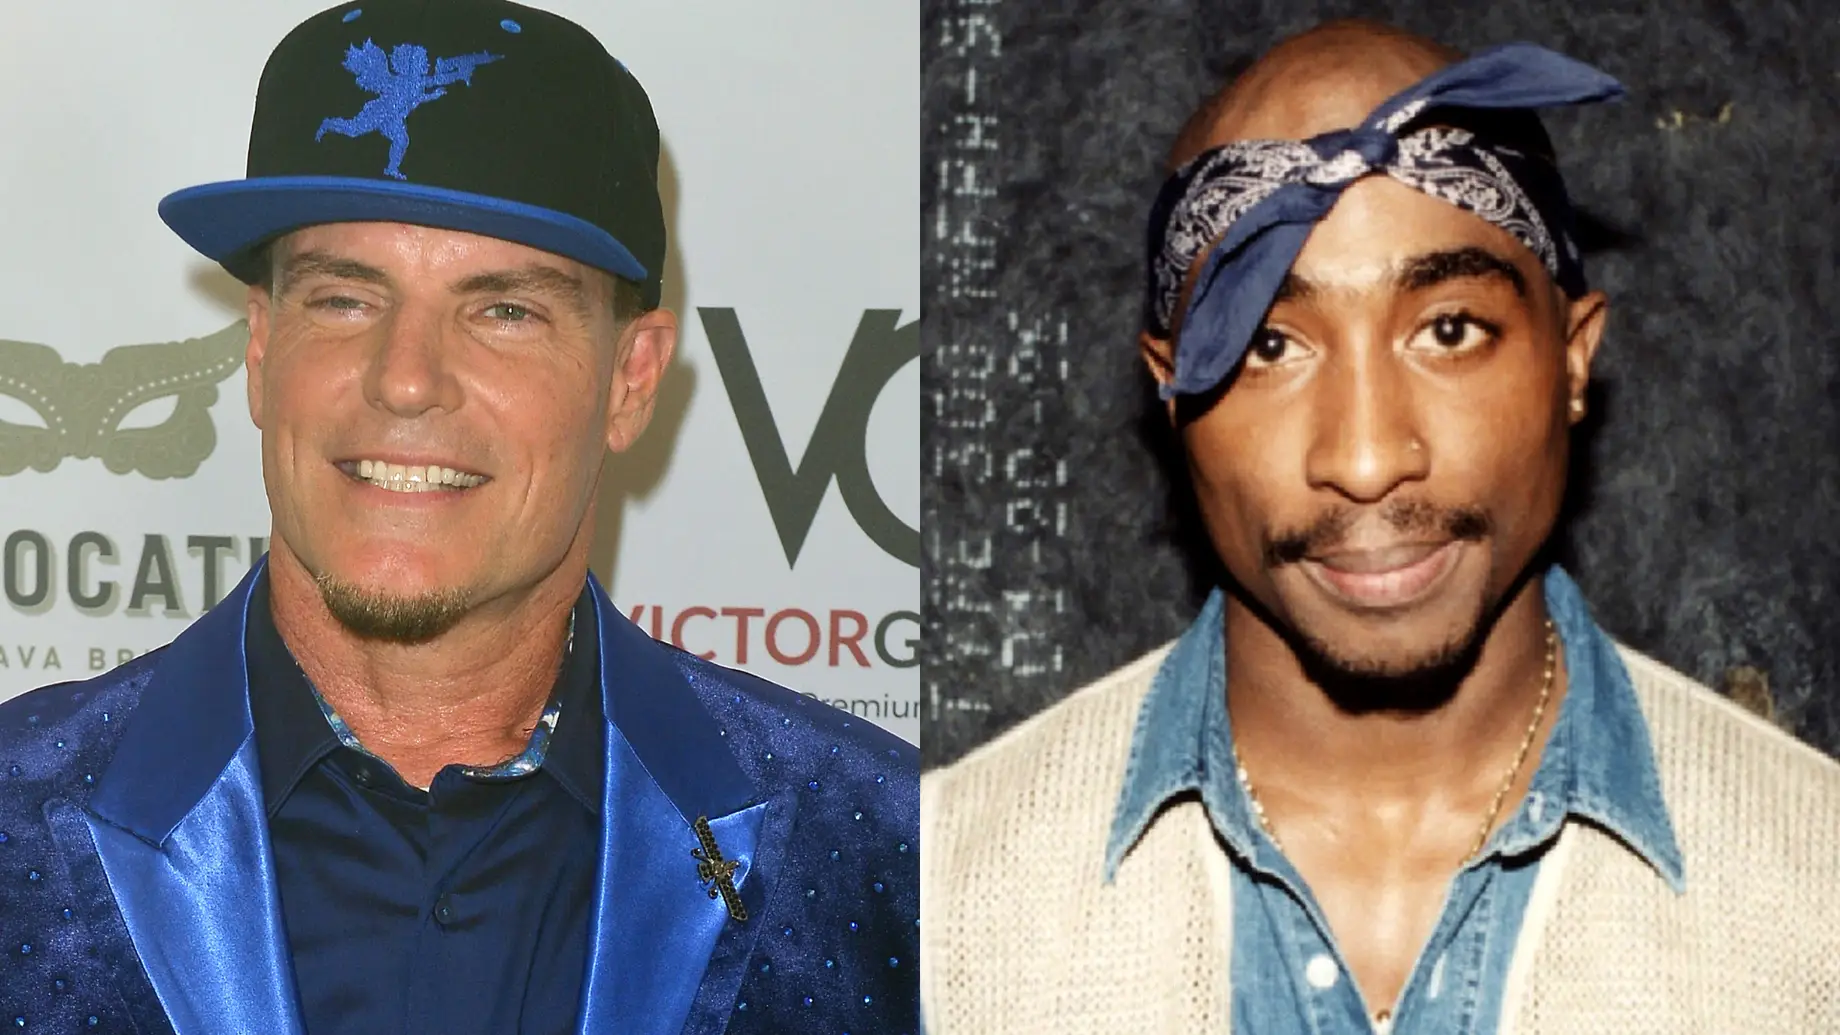 Vanilla Ice Fondly Recalled His Friendship With Tupac, But Noted That He Knows ‘Too Much’ About His Death [Video]